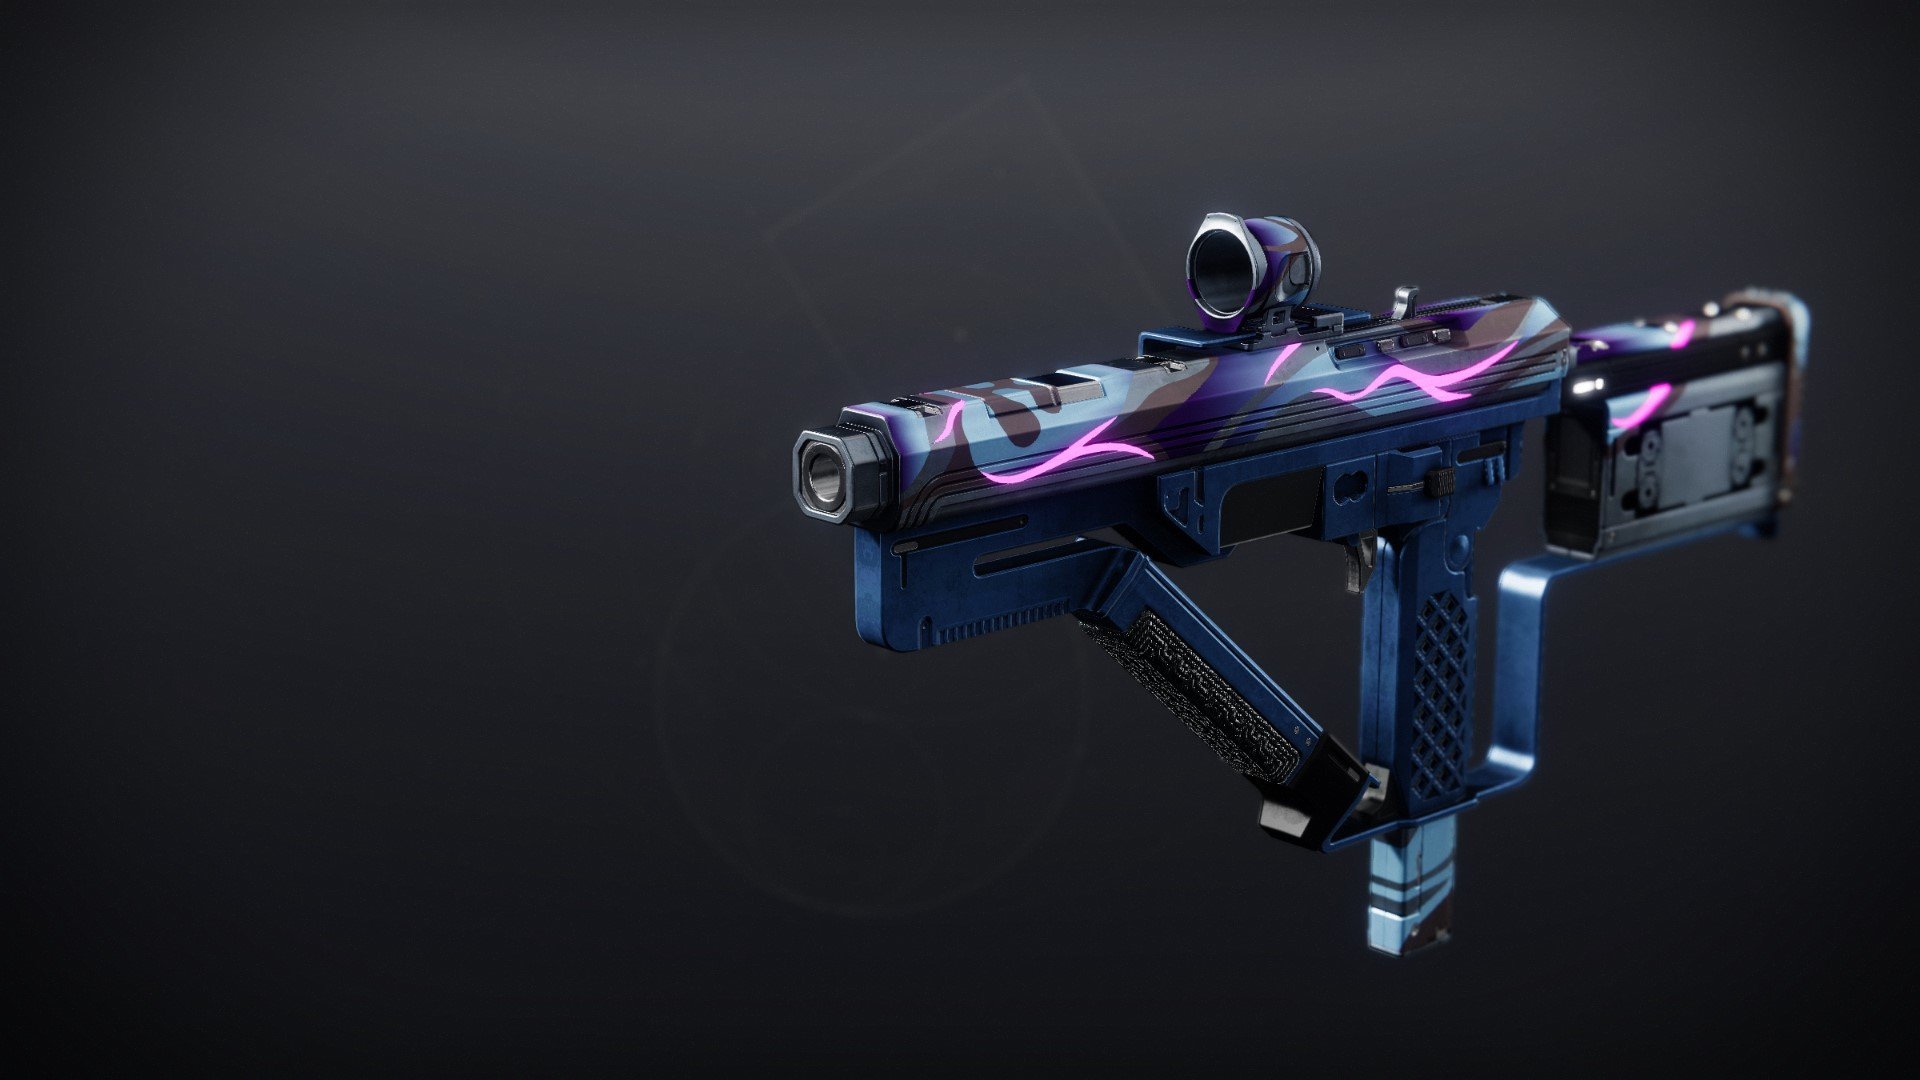 An in-game render of the Synchronic Roulette.